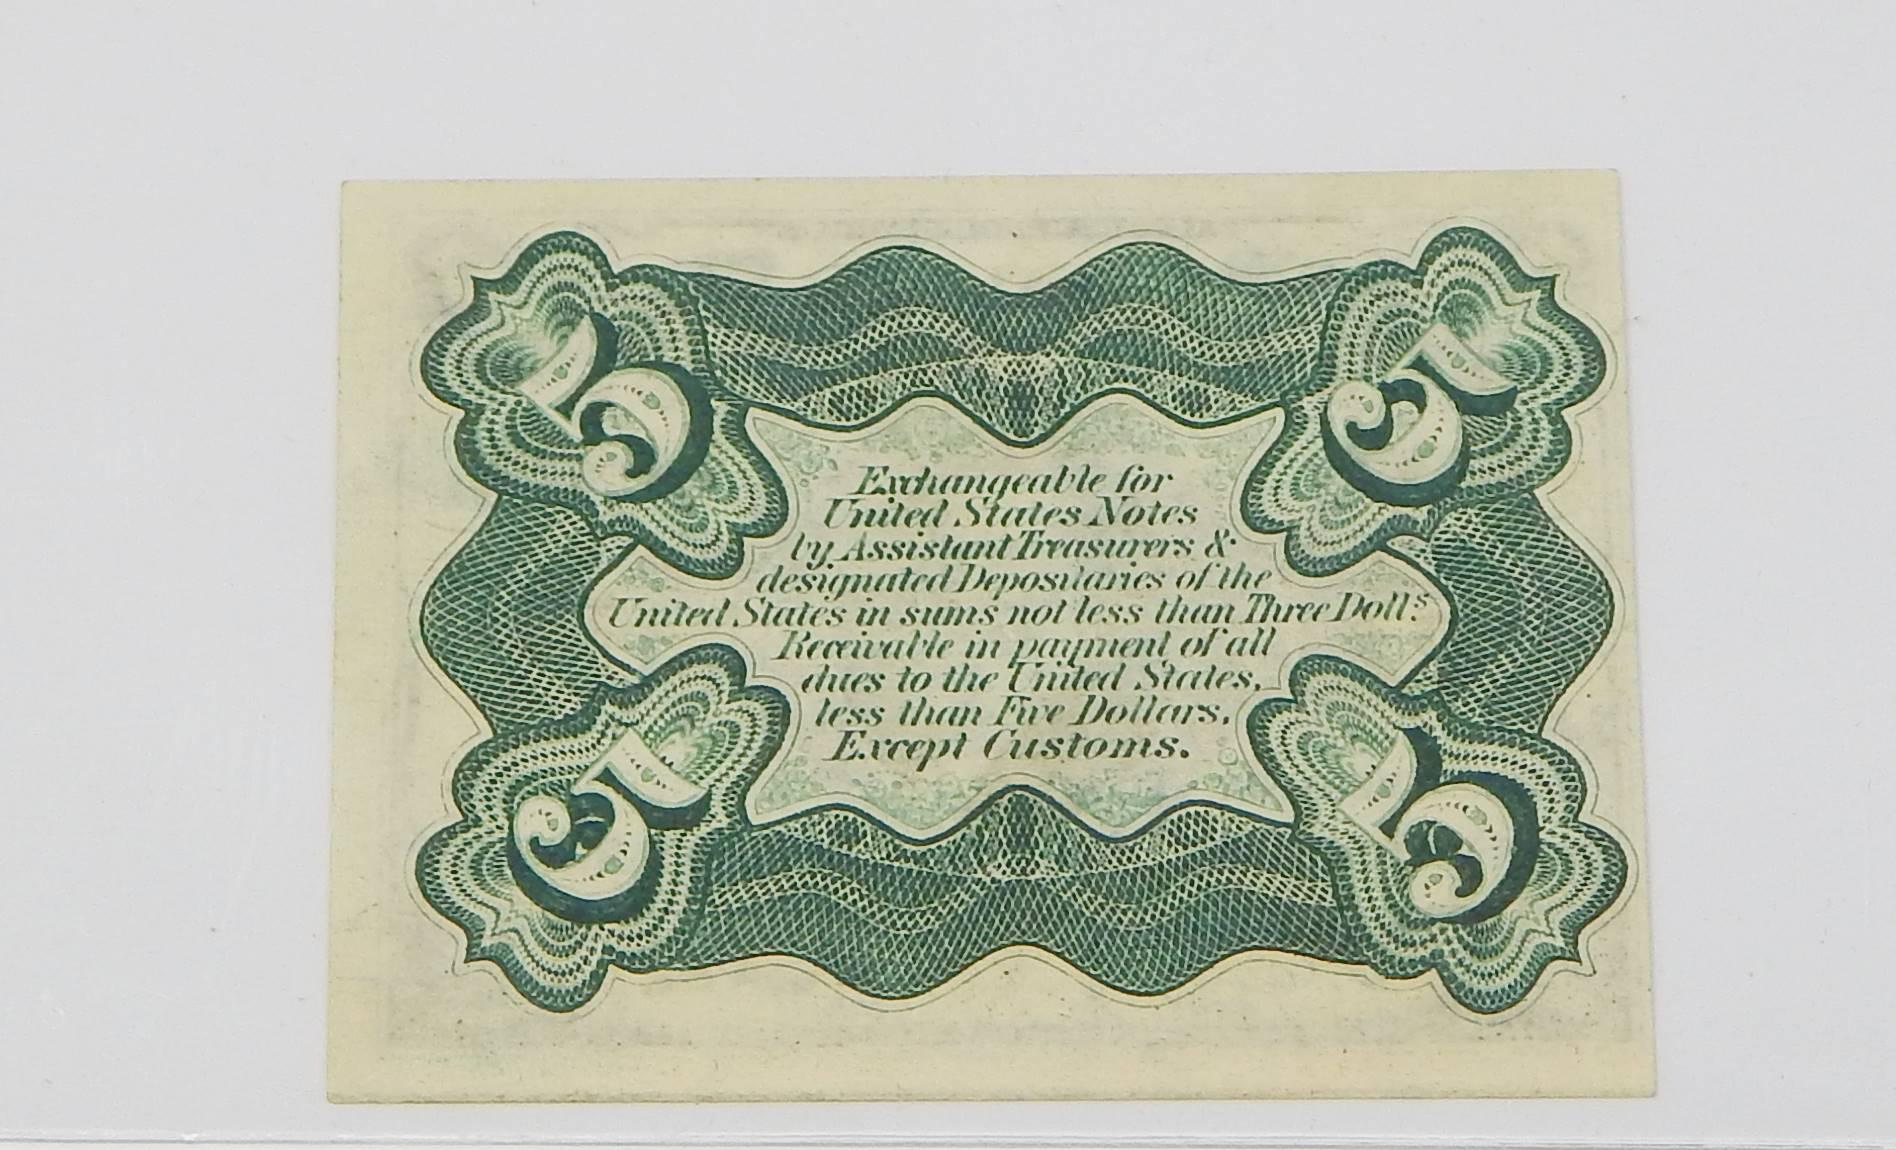 FRACTIONAL CURRENCY - THIRD ISSUE 5 CENT NOTE, GREEN BACK